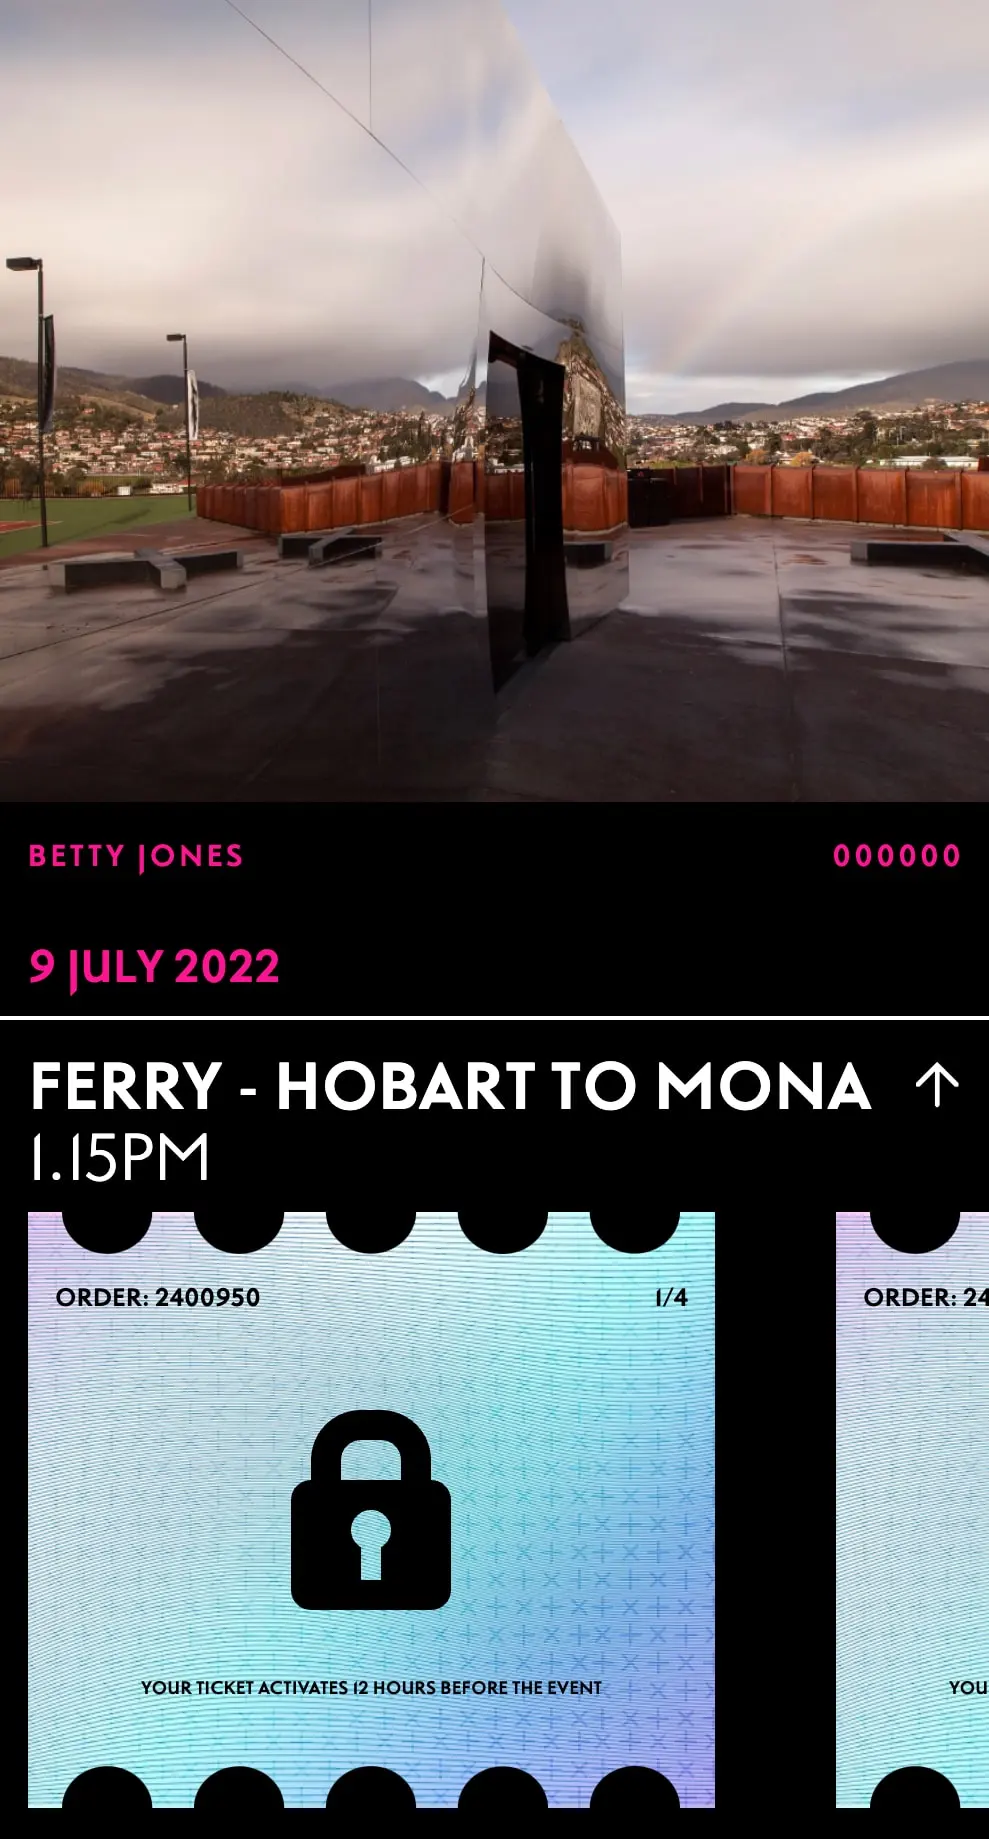 Museum of Old and New Art example ticket 